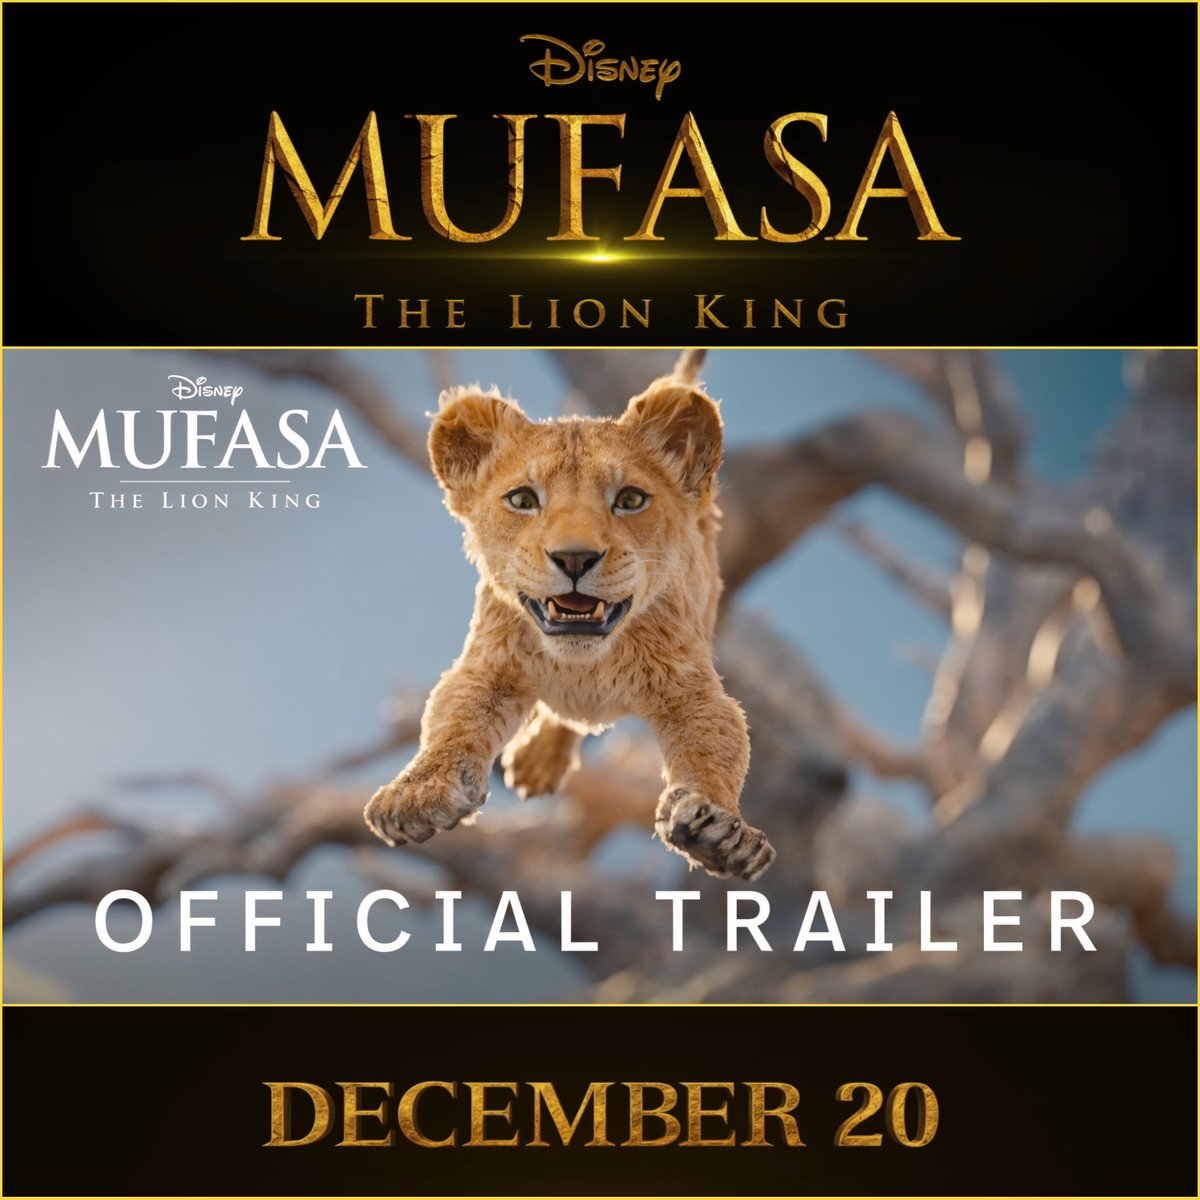 News - Be Informed By @RebusFarm . 🌐 bit.ly/3R4hvj8 . Walt Disney Studios - Mufasa: The Lion King Official Trailer . The beloved lion King returns. Mufasa explores the King's rise and legacy in theaters on December 20, 2024! . #vwartclub #vrayworld #rebusfarm #news